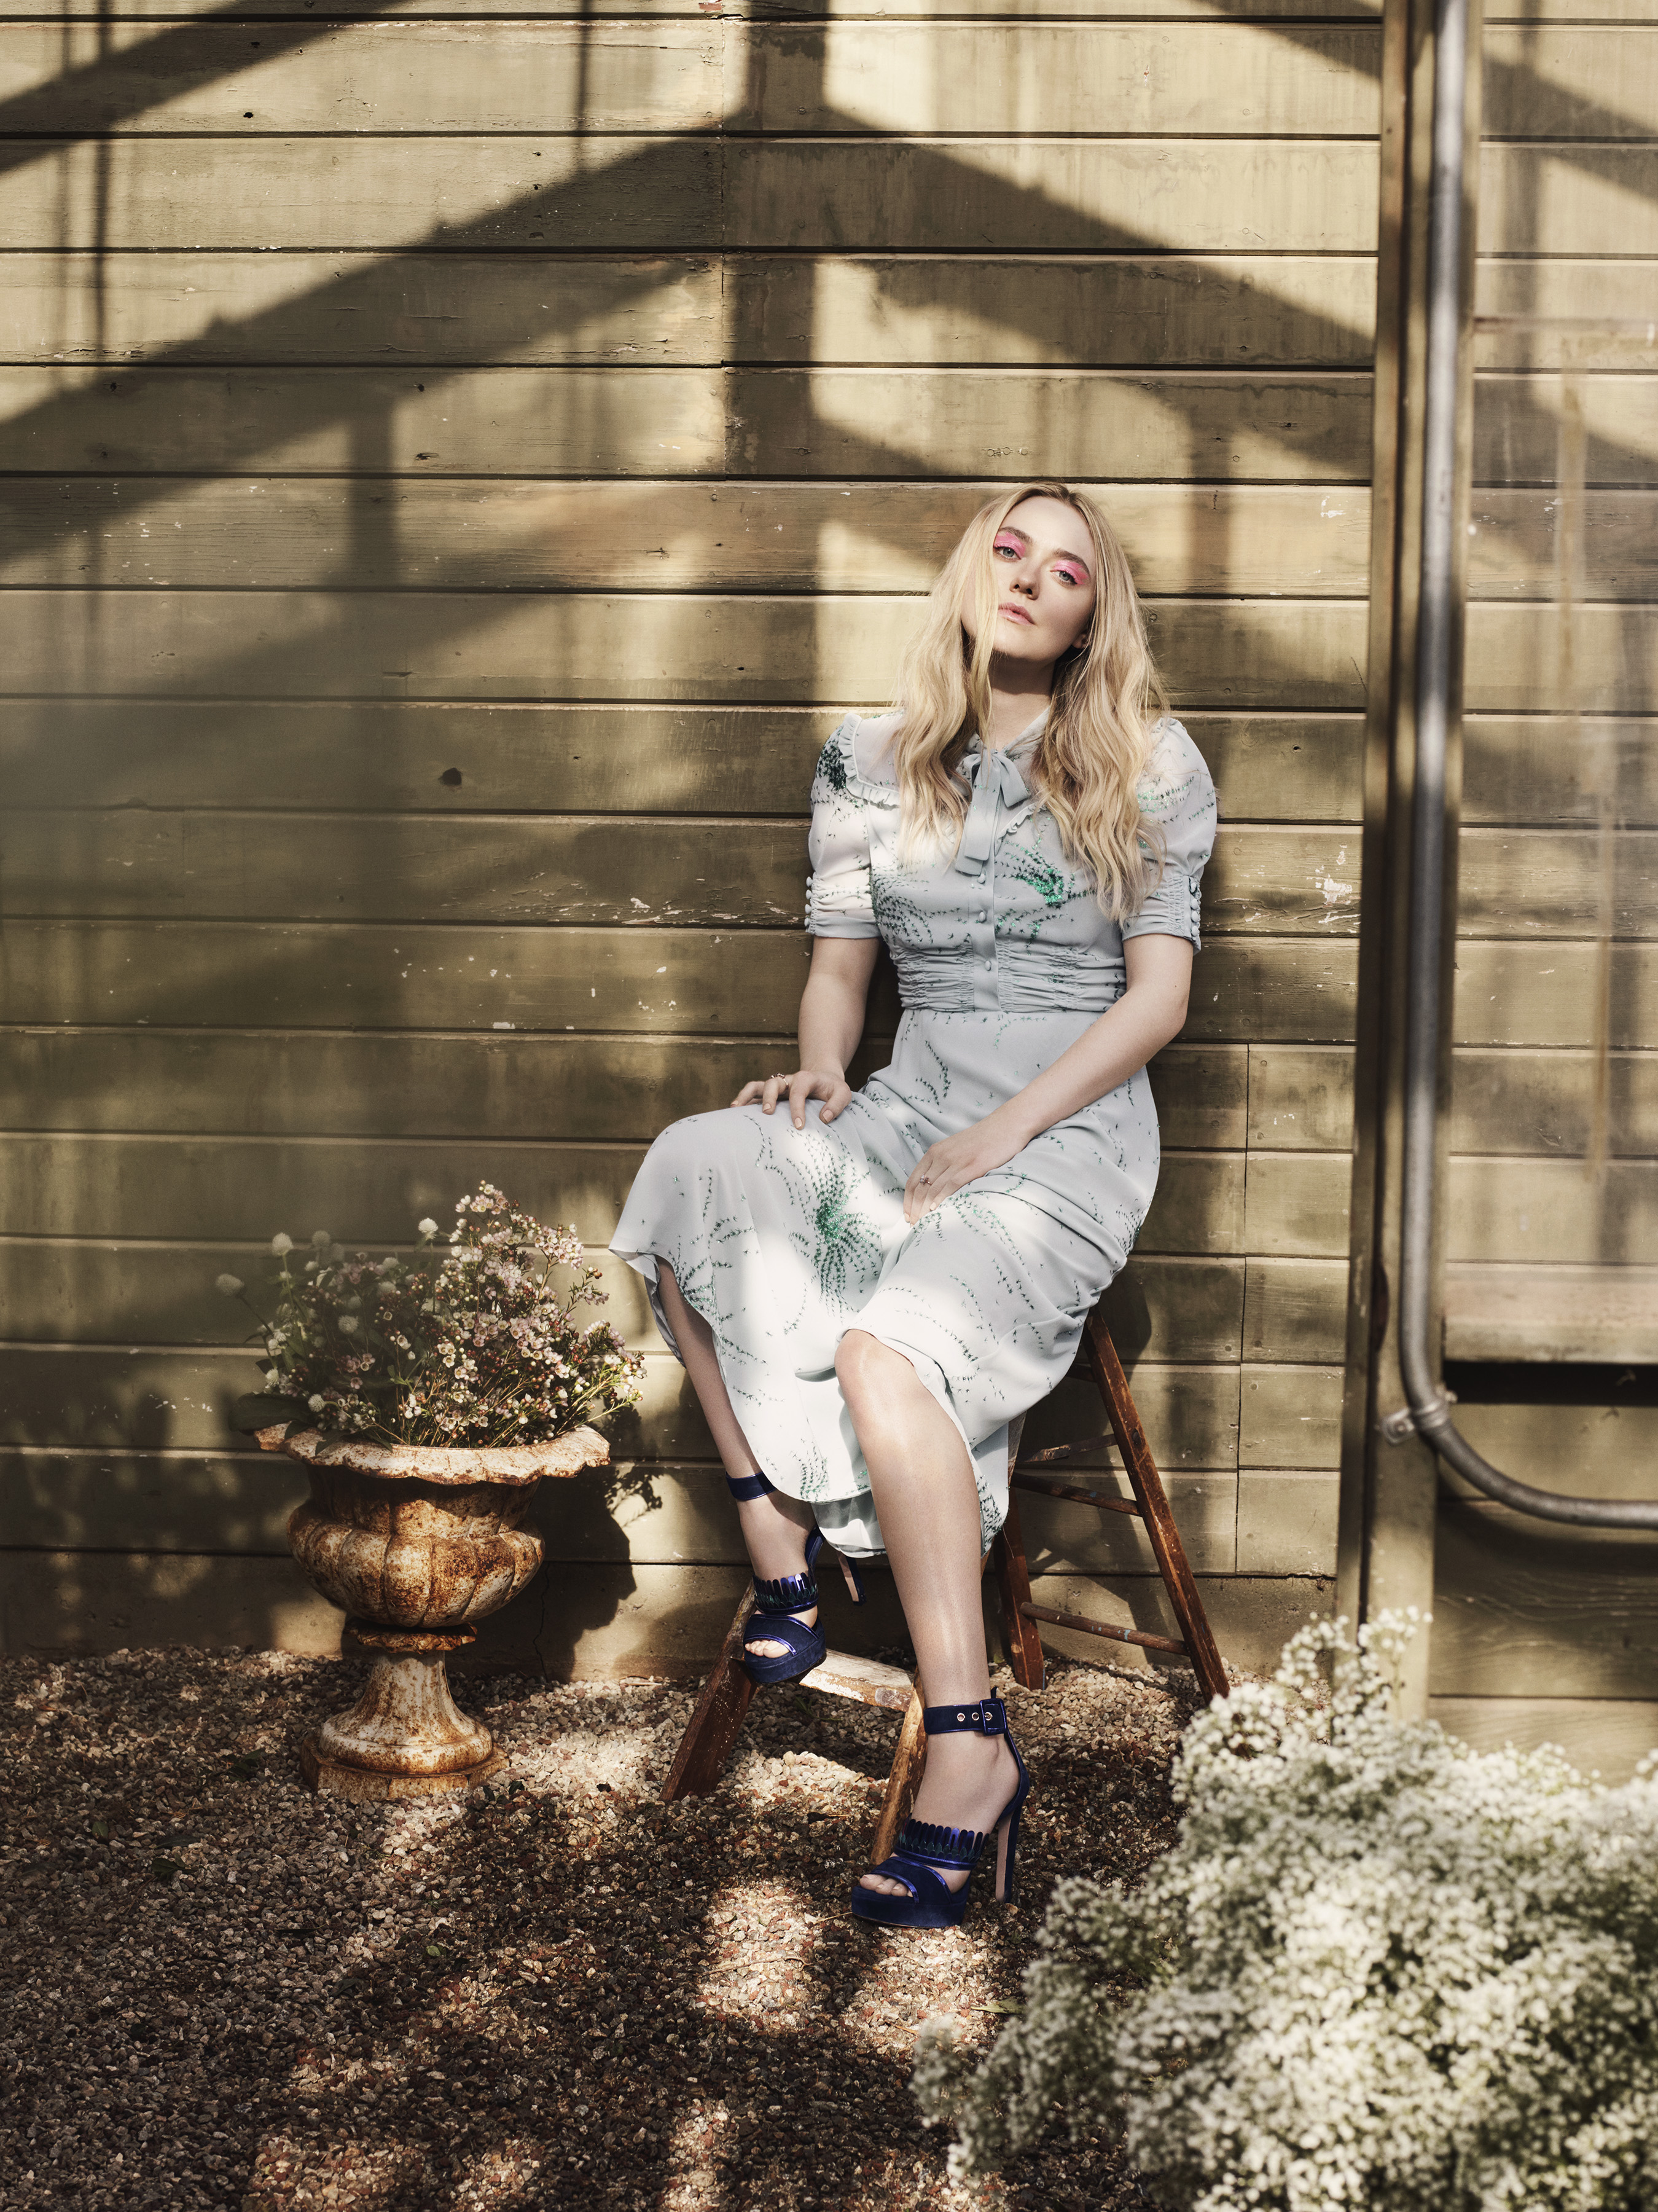 Dakota Fanning's Spring Style Diary for Jimmy Choo - Daily Front Row